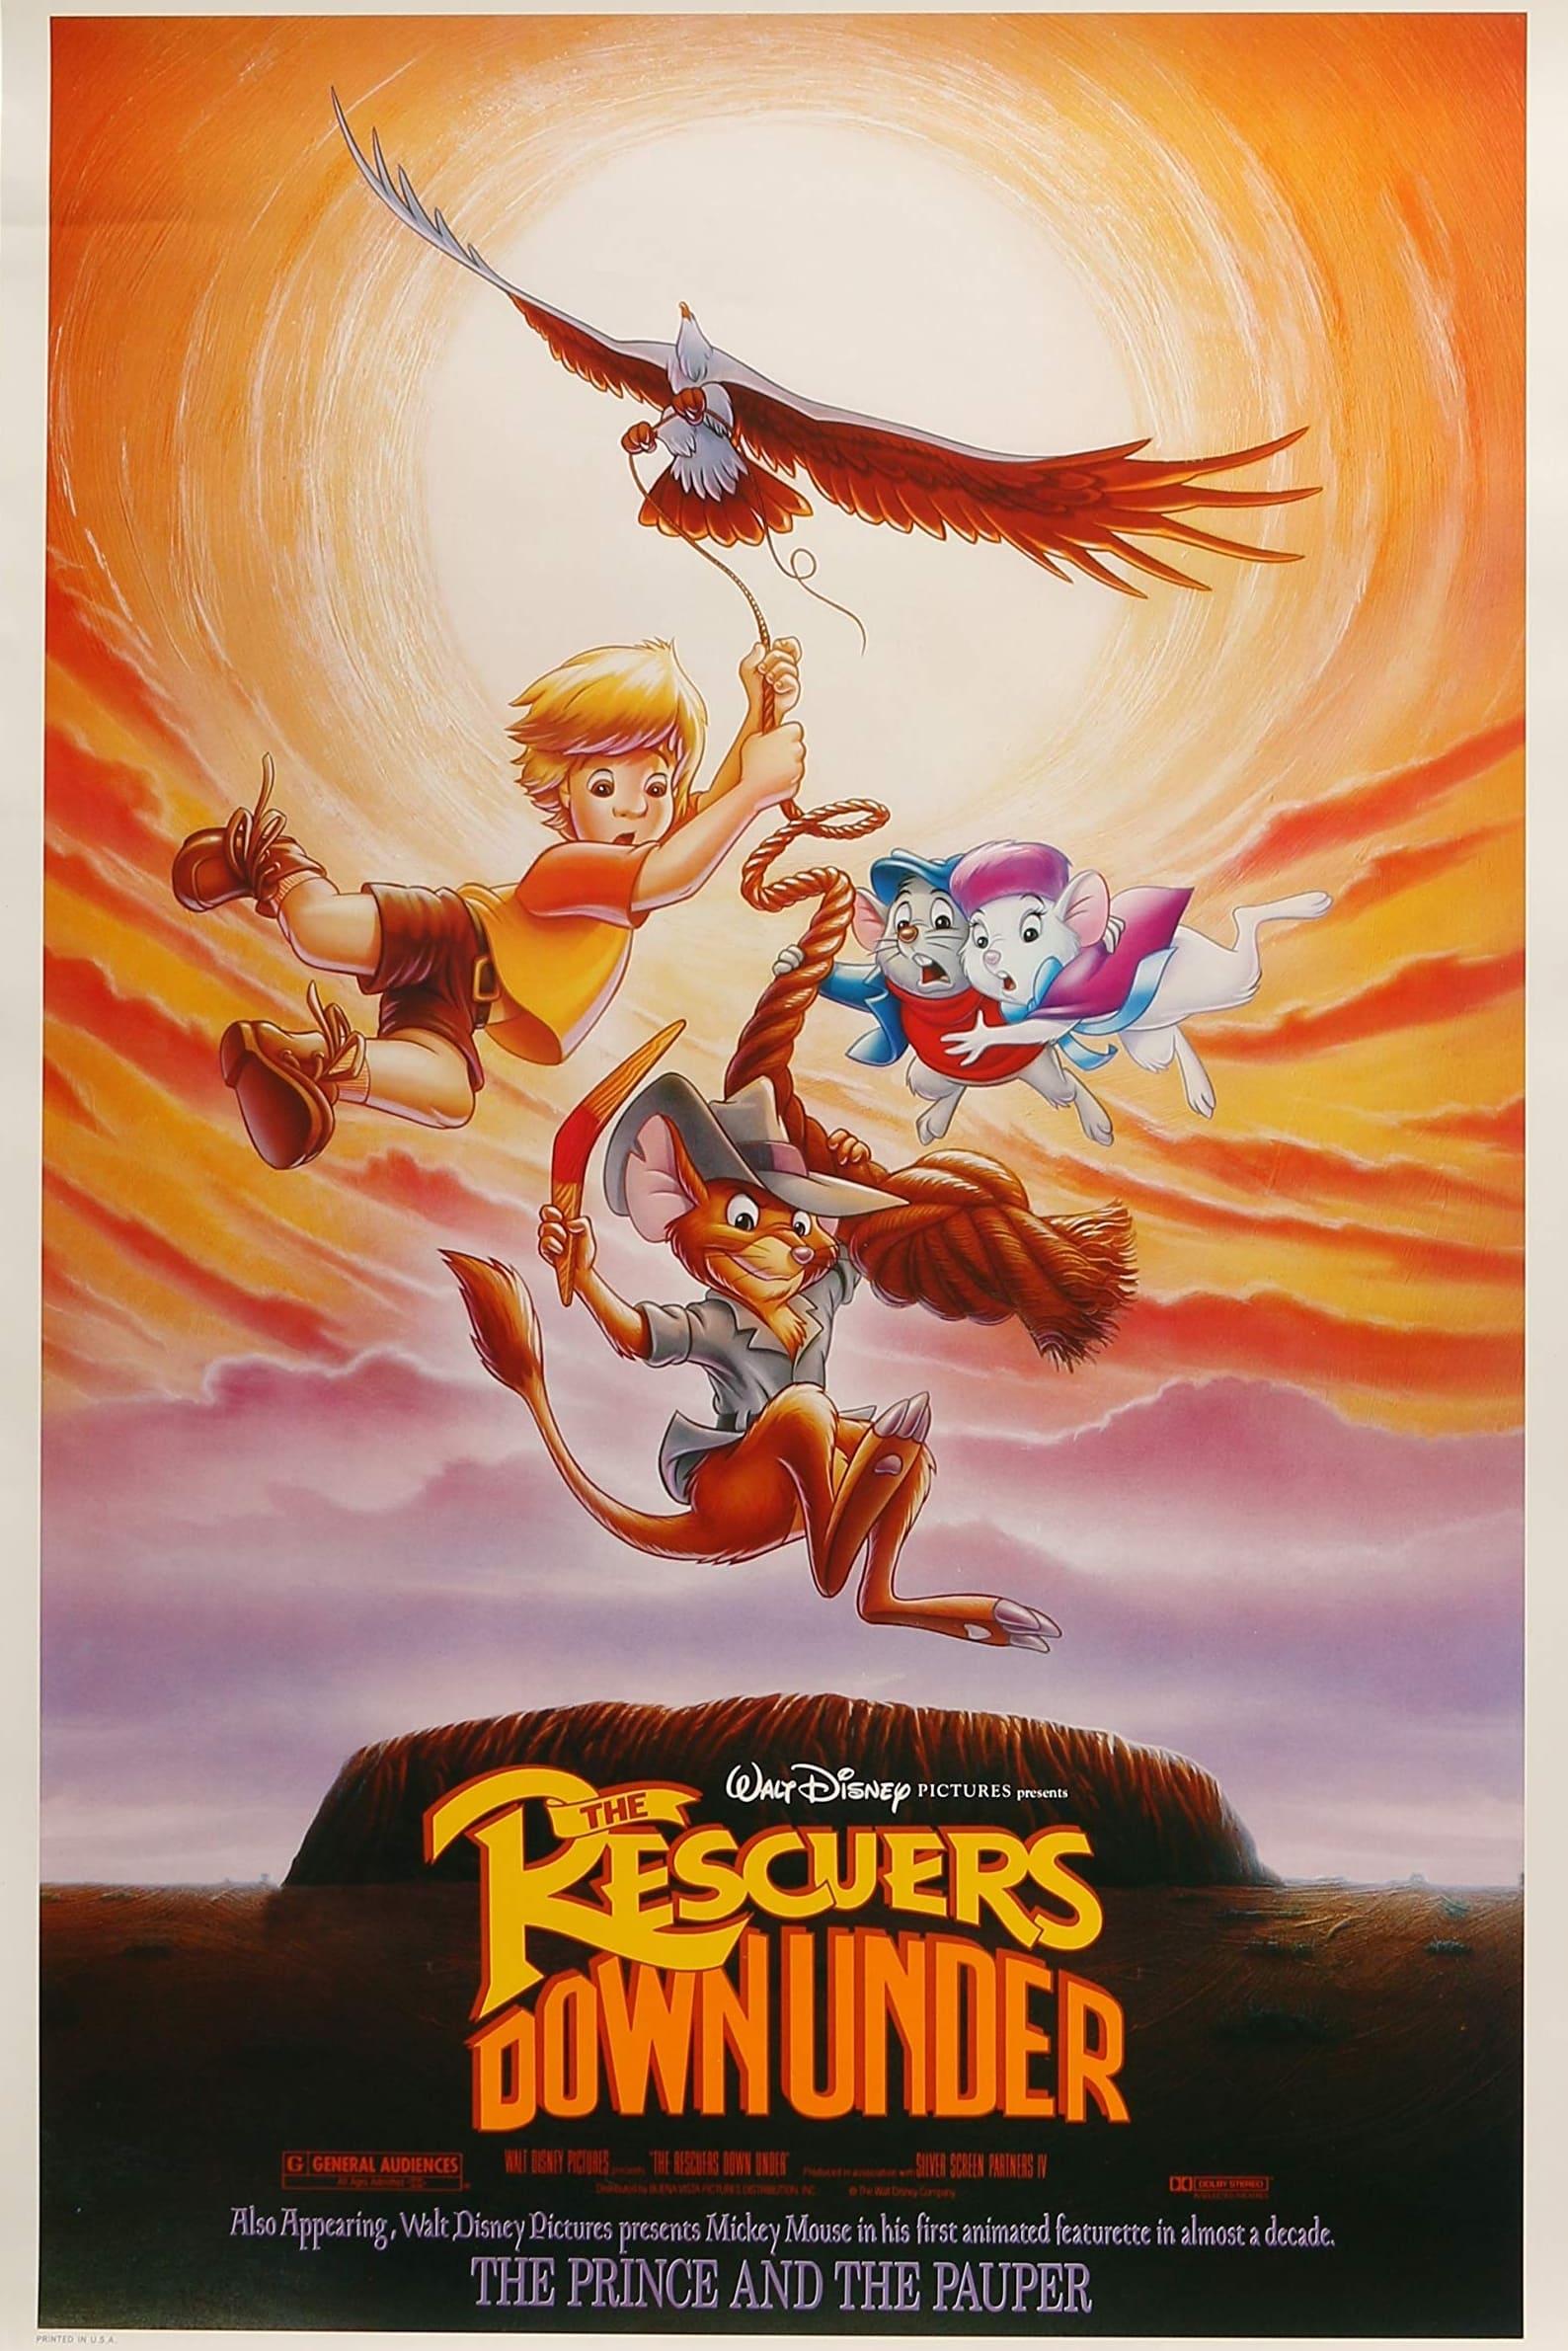 The Rescuers Down Under poster